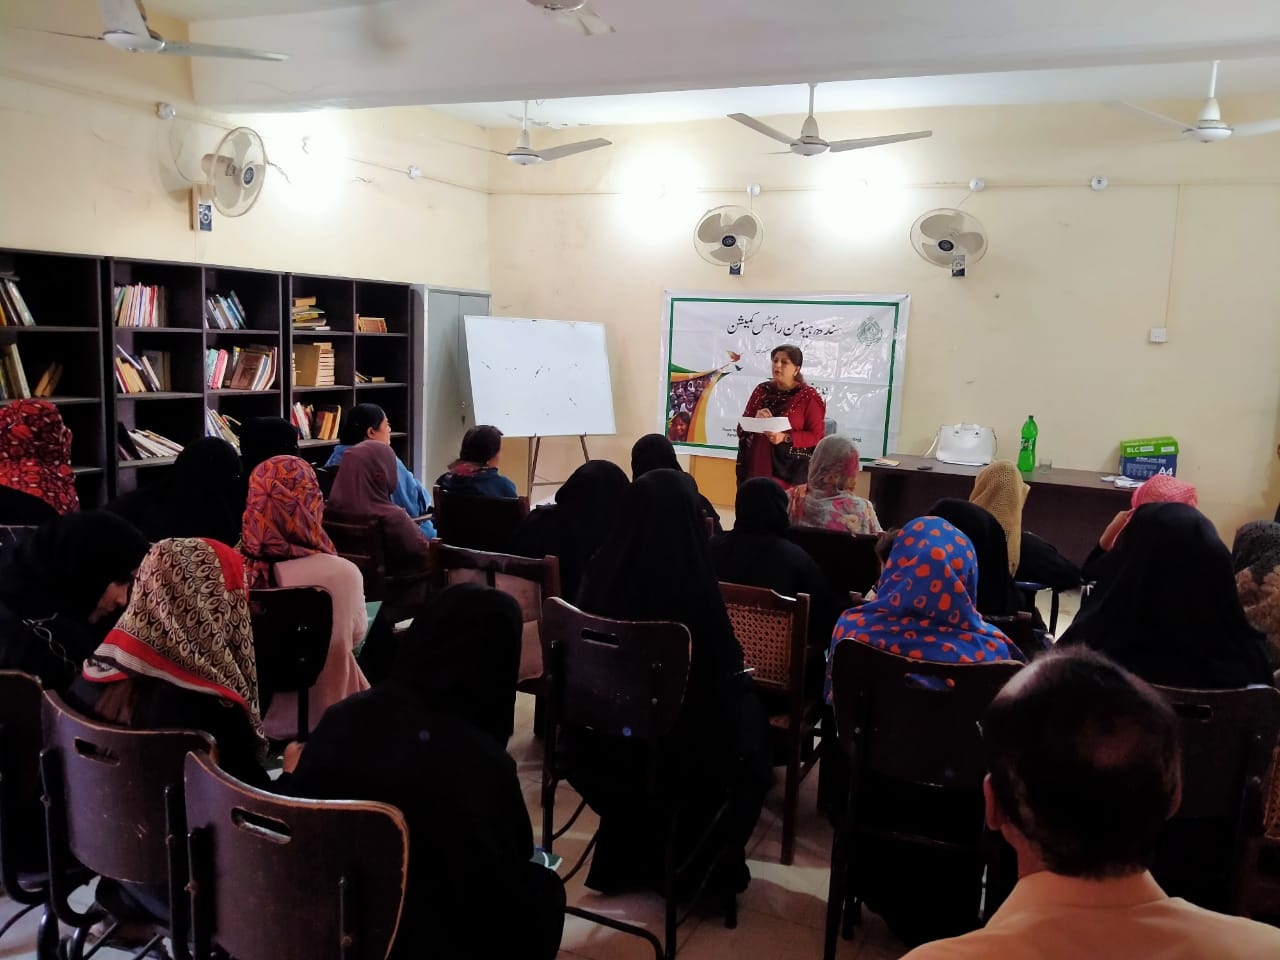 Awareness session with Lyari Community Development Project